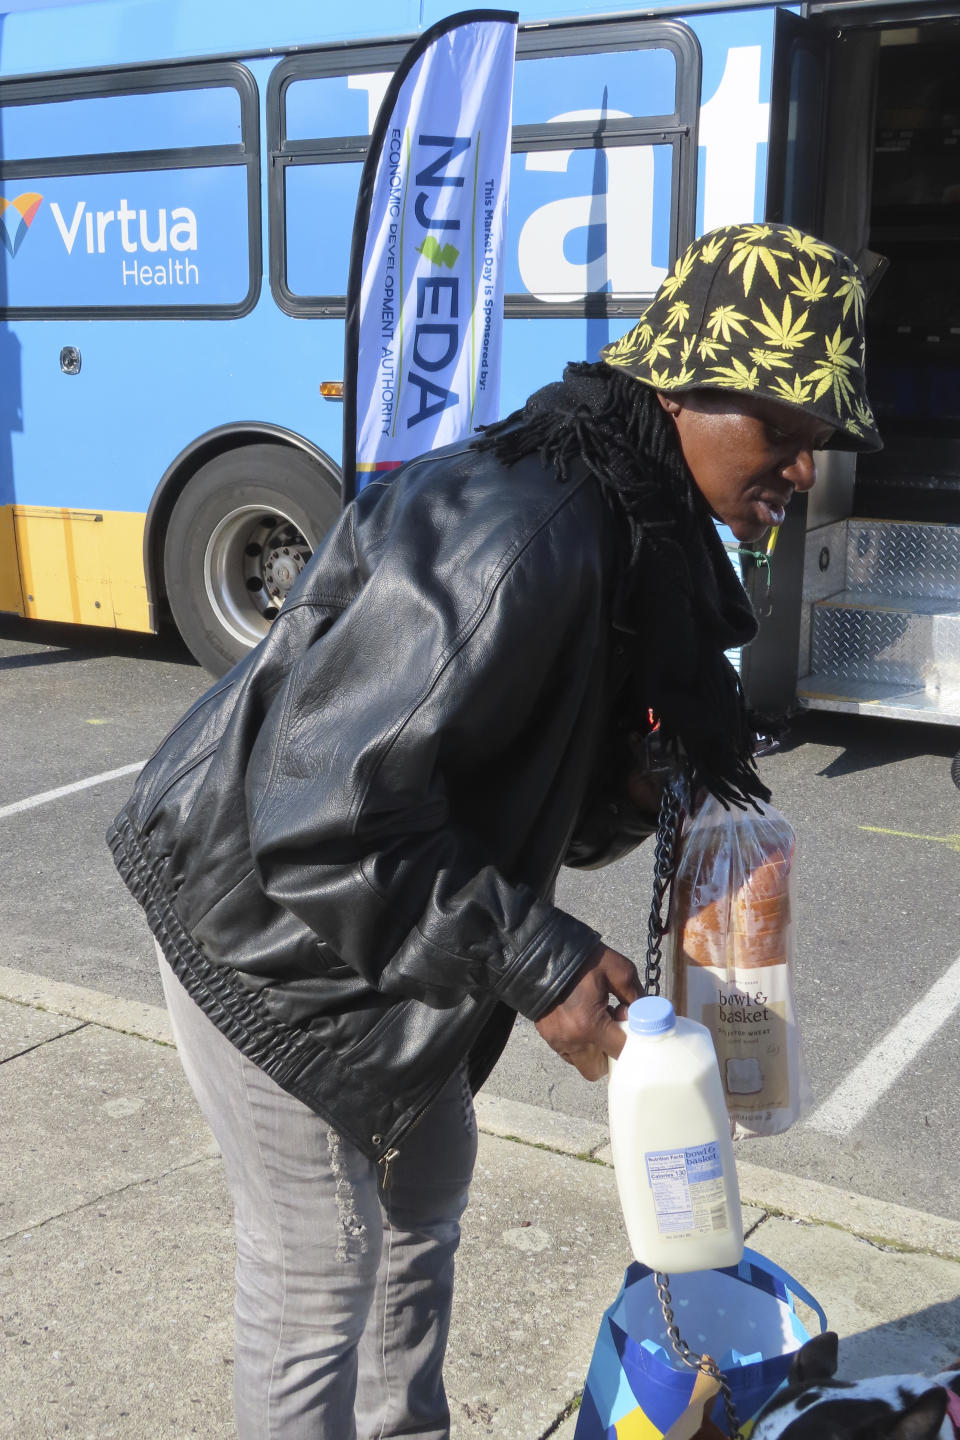 Delorese Butley-Whaley examines her purchases of milk and bread outside a specially modified bus that serves as a mobile supermarket in Atlantic City N.J. on Friday, Dec. 8, 2023. Virtua Health and the New Jersey Economic Development Authority are operating a service to bring fresh groceries and produce to Atlantic City, where plans for what would be the city's first supermarket in nearly 20 years recently fell through. (AP Photo/Wayne Parry)